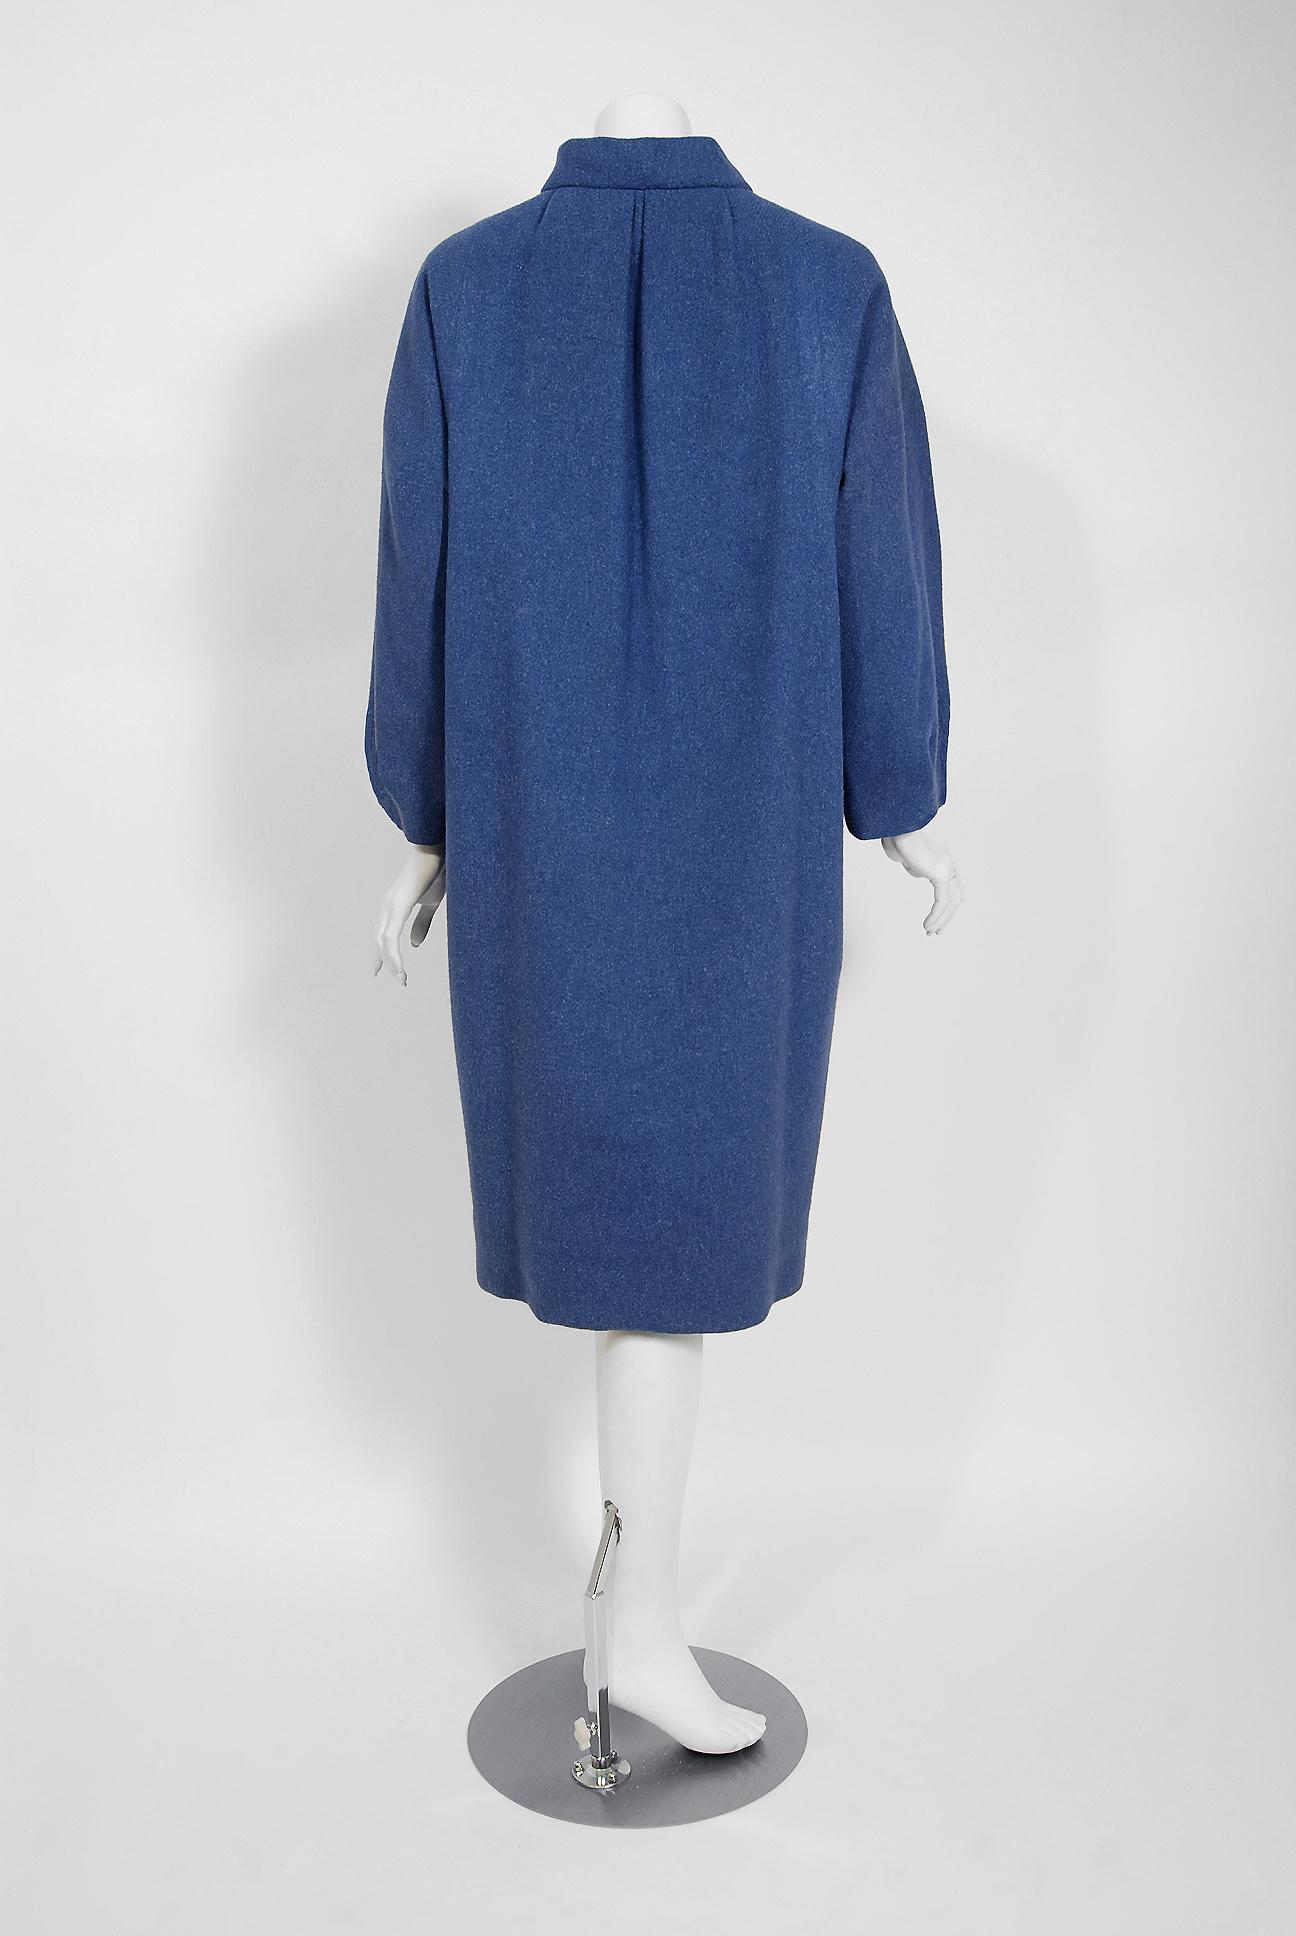 Women's Vintage 1958 Yves Saint Laurent for Christian Dior Couture Documented Blue Coat